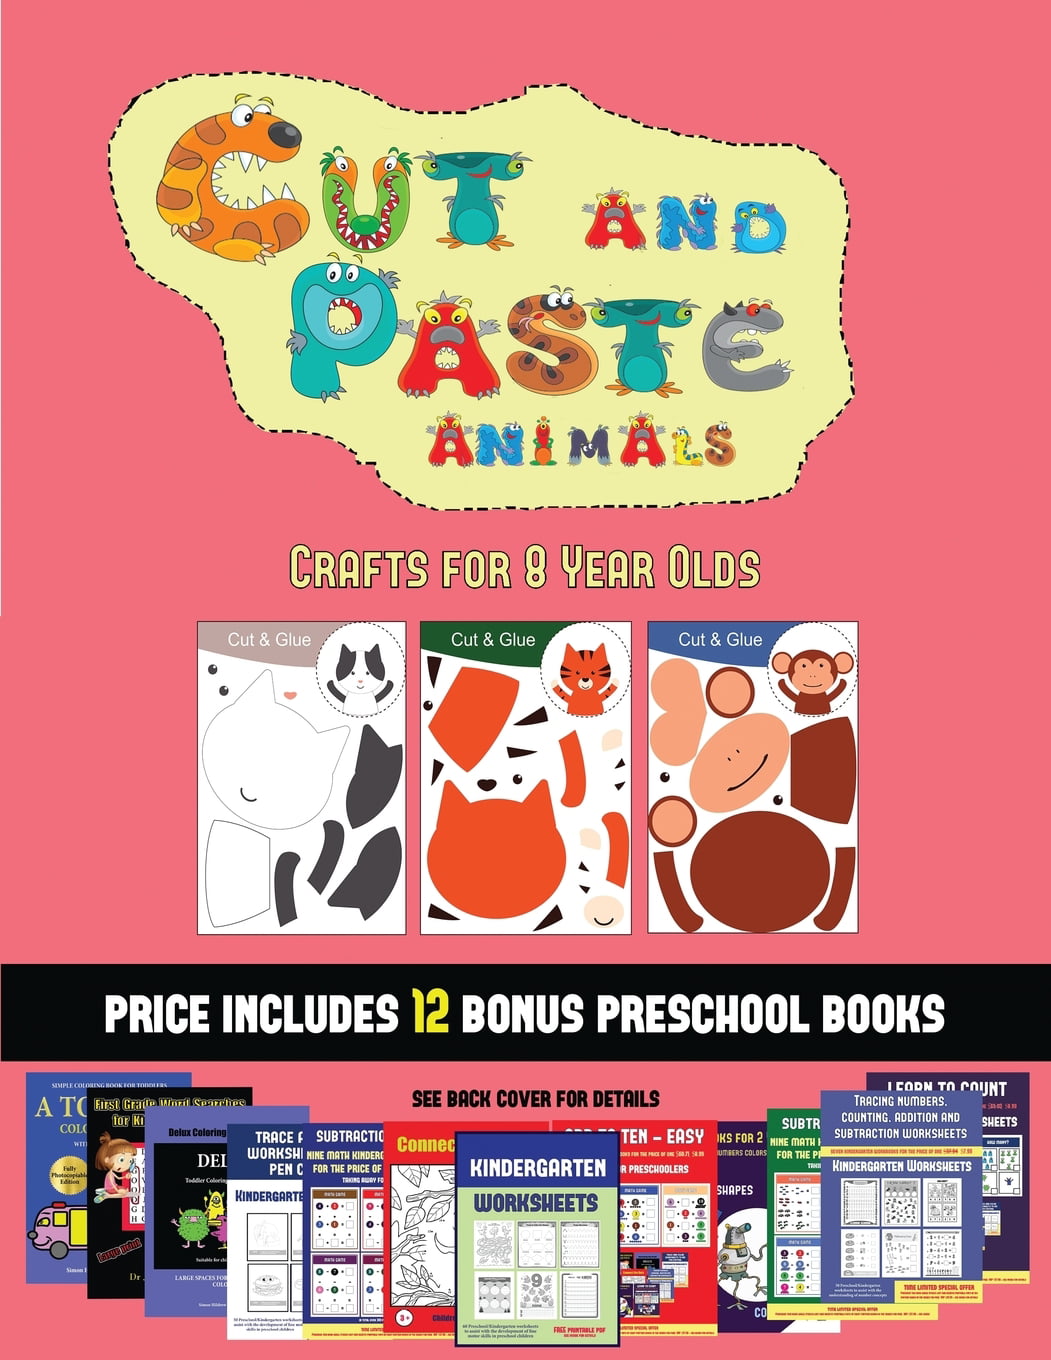 Crafts for 8 Year Olds: Crafts for 8 Year Olds (Cut and Paste Animals